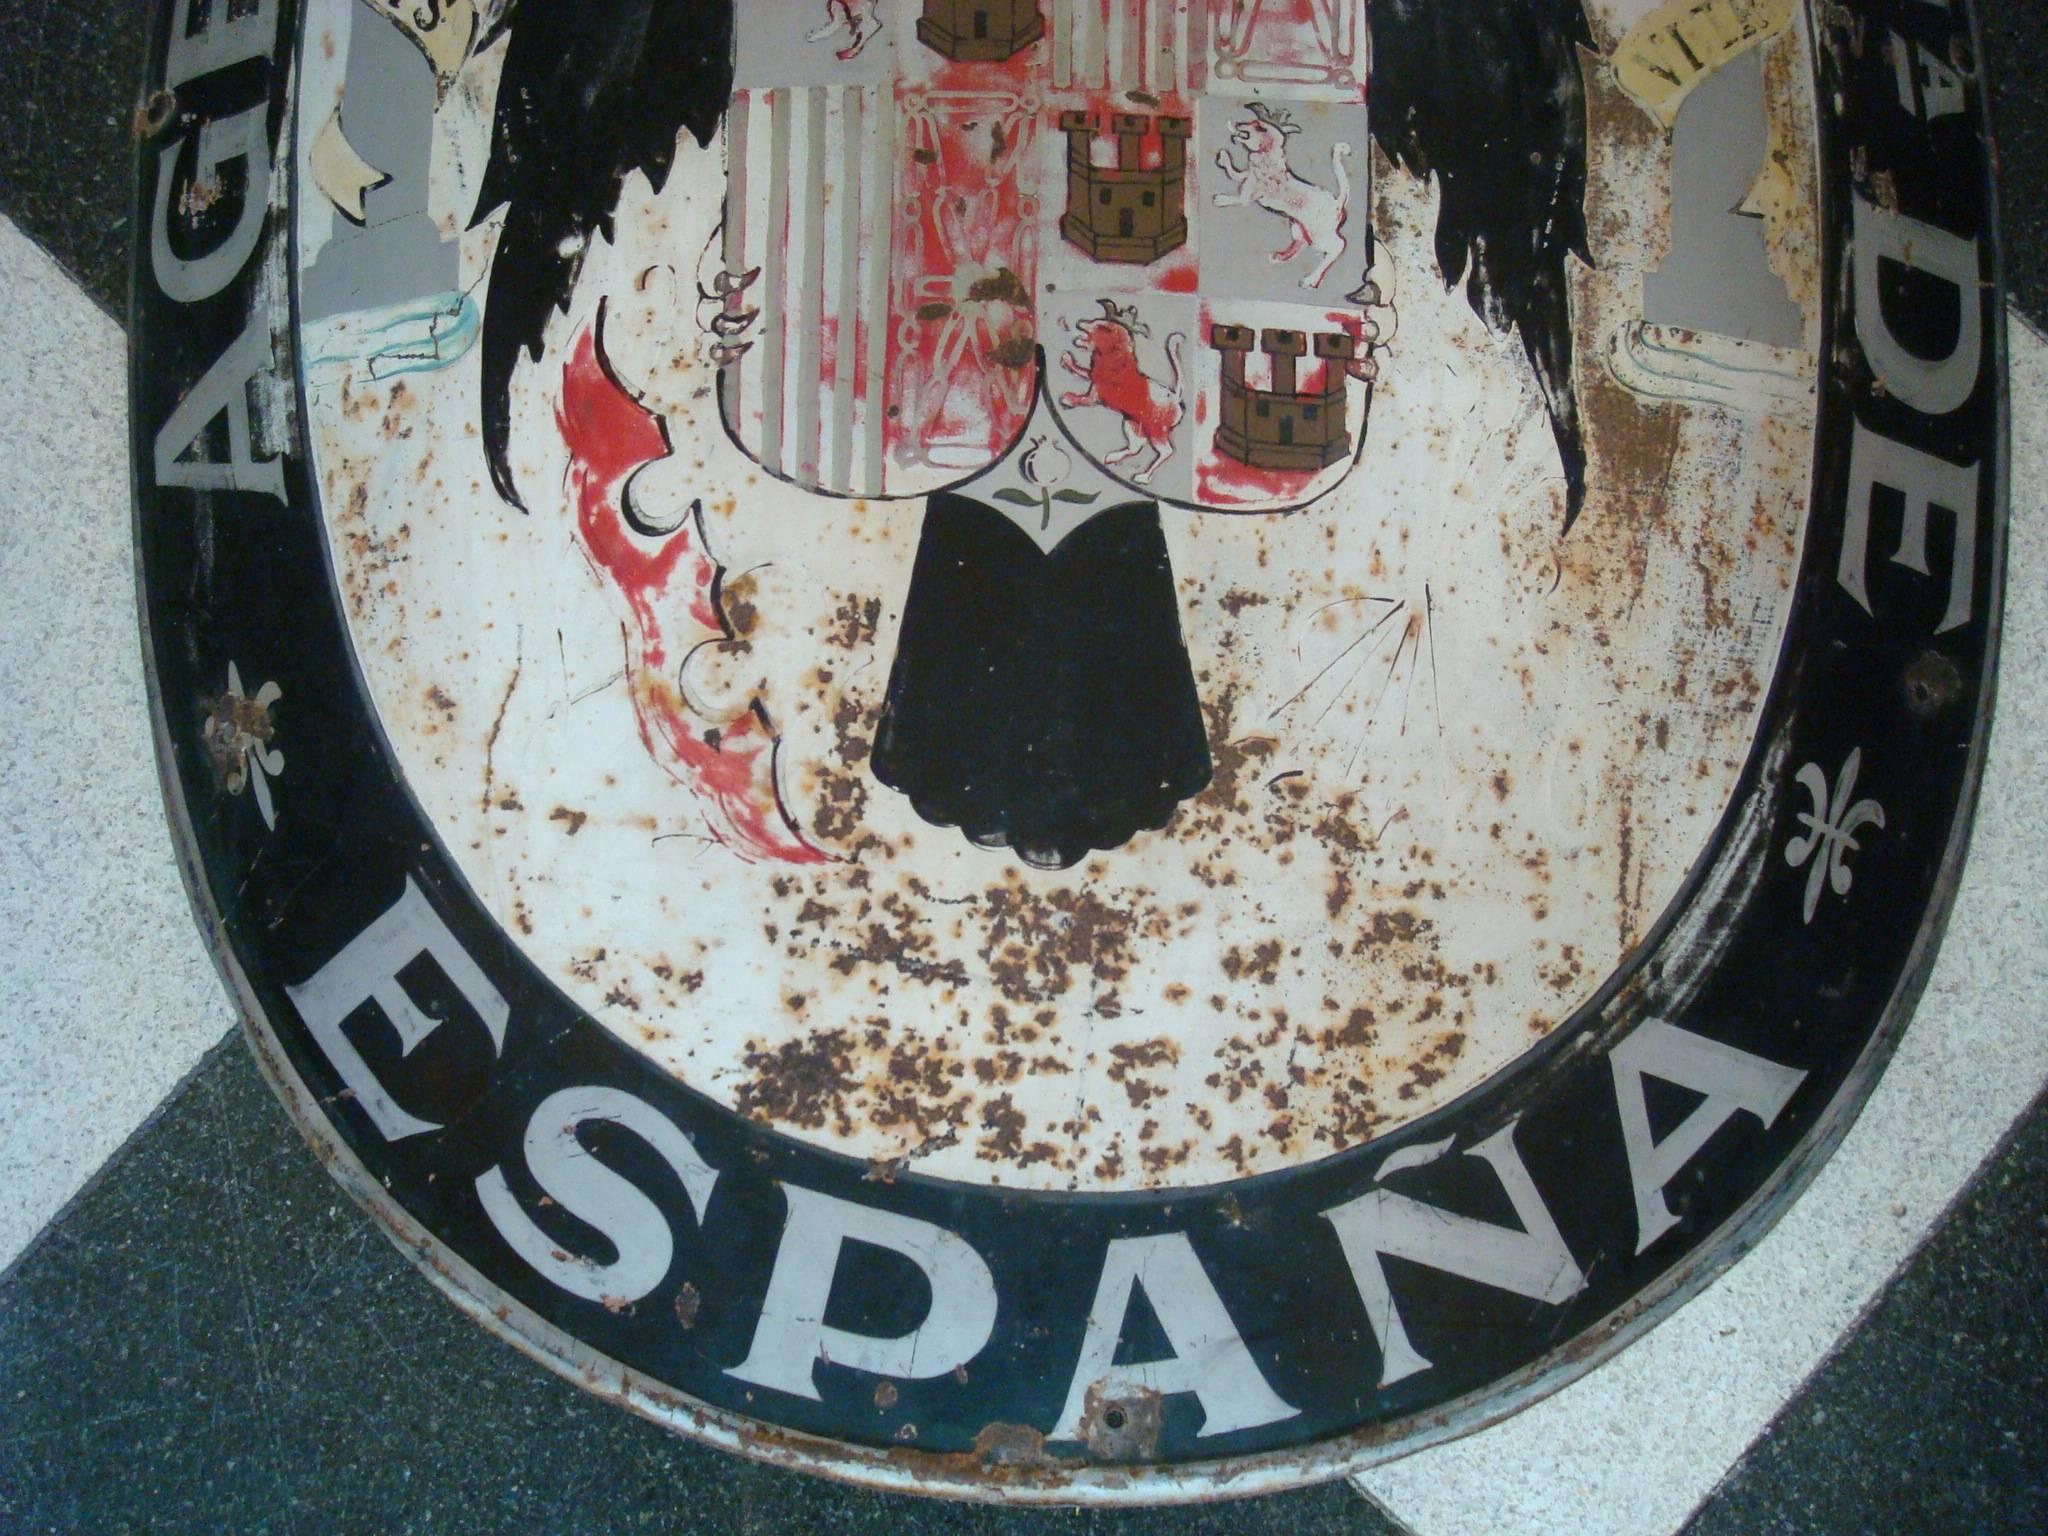 Spanish consulate embassy sign with royal eagle, 1910-1930.
Very nice and rare consulate of Spain Lithograph sign. It says Agencia Consular Ha de España.